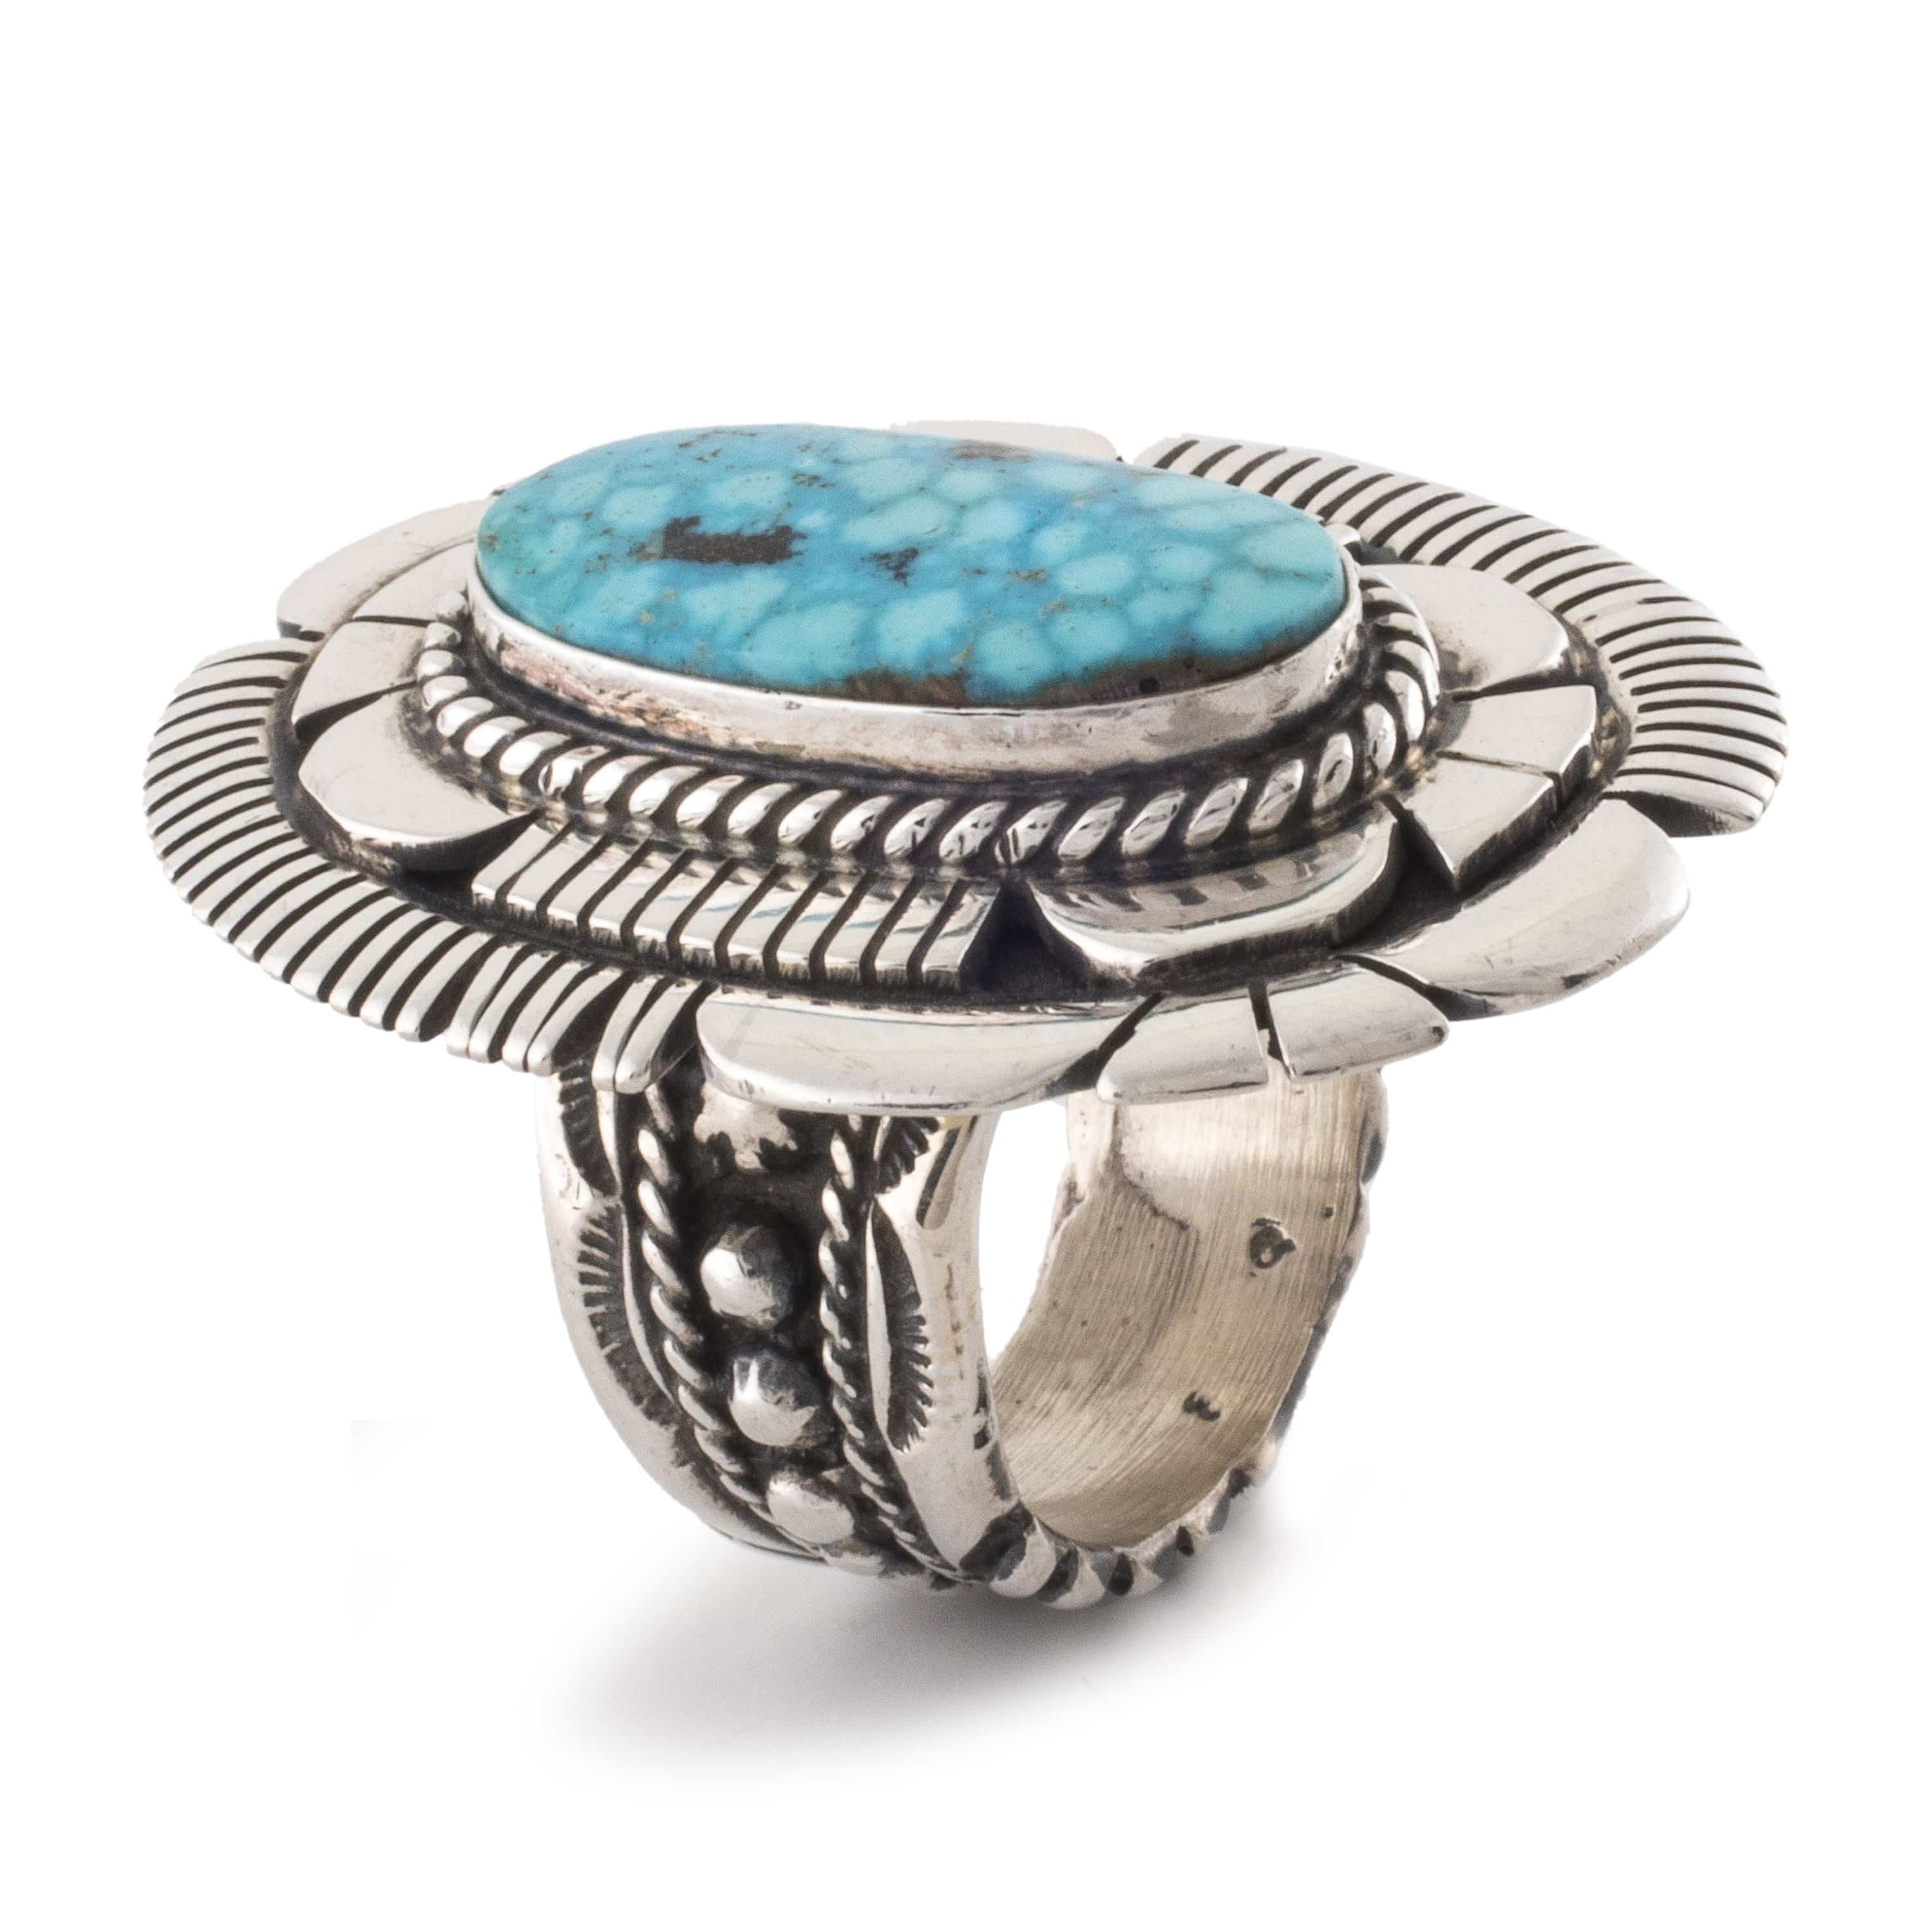 Kalifano Native American Jewelry 8 Russell Sam Kingman Turquoise USA Native American Made 925 Sterling Silver Ring NAR800.017.8